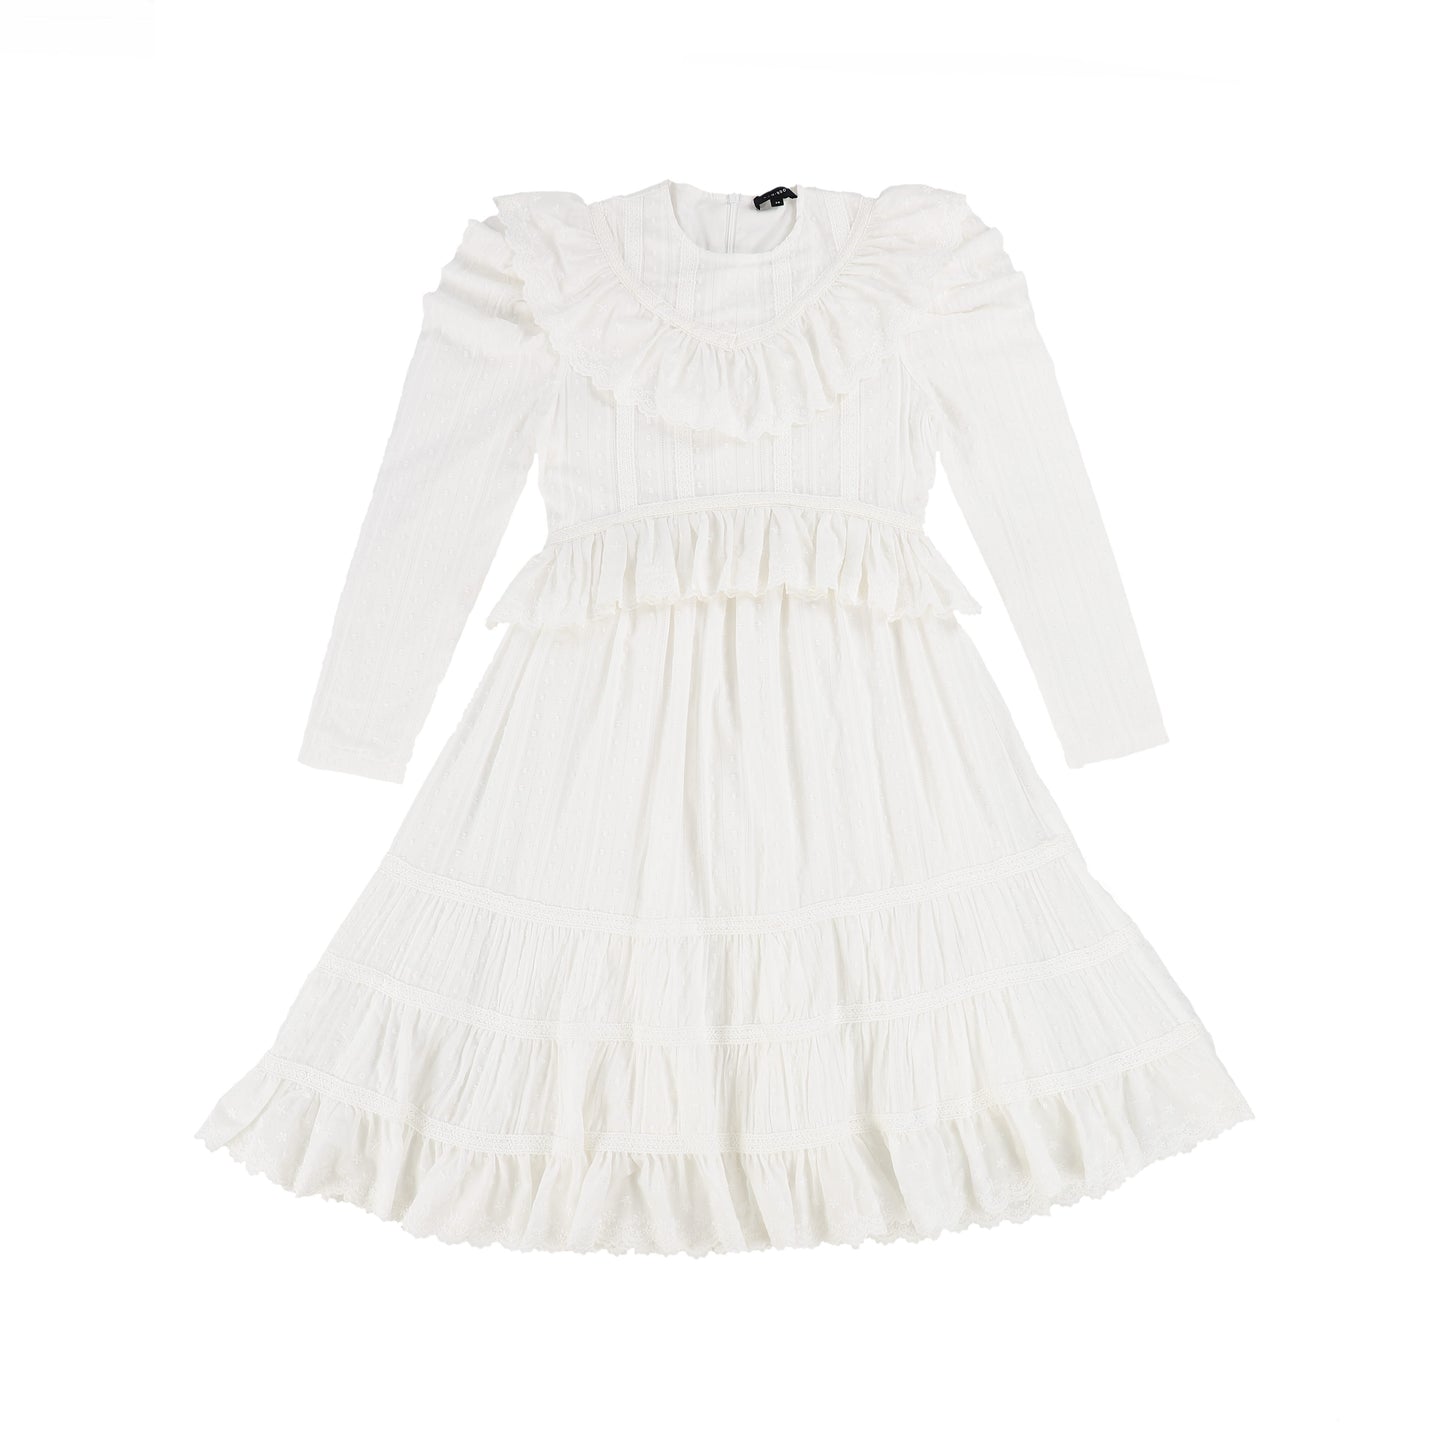 BAMBOO IVORY EMBROIDERED LACE RUFFLE DRESS [Final Sale]